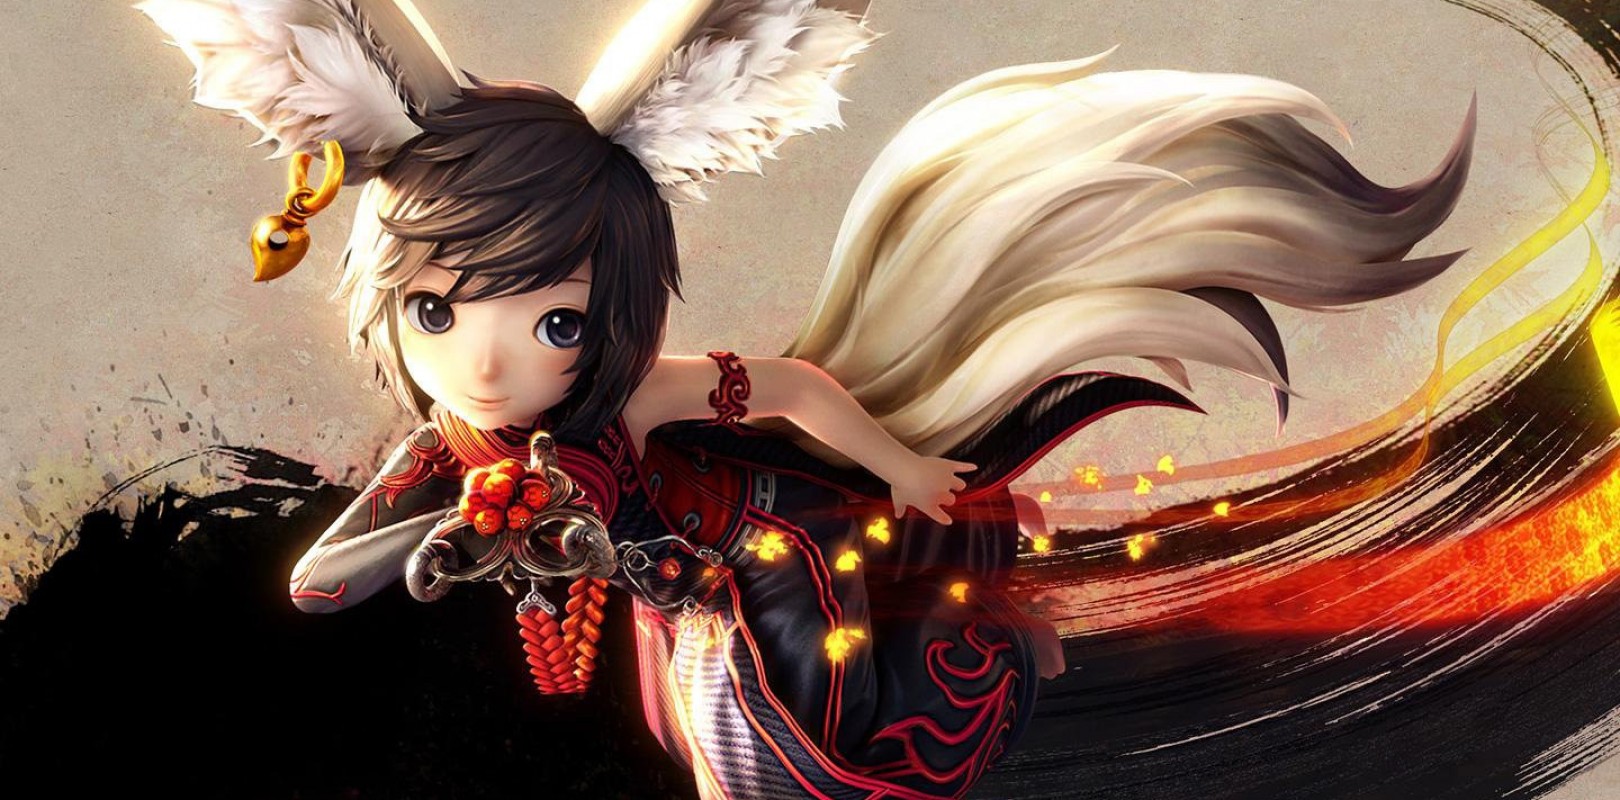 blade and soul master pack